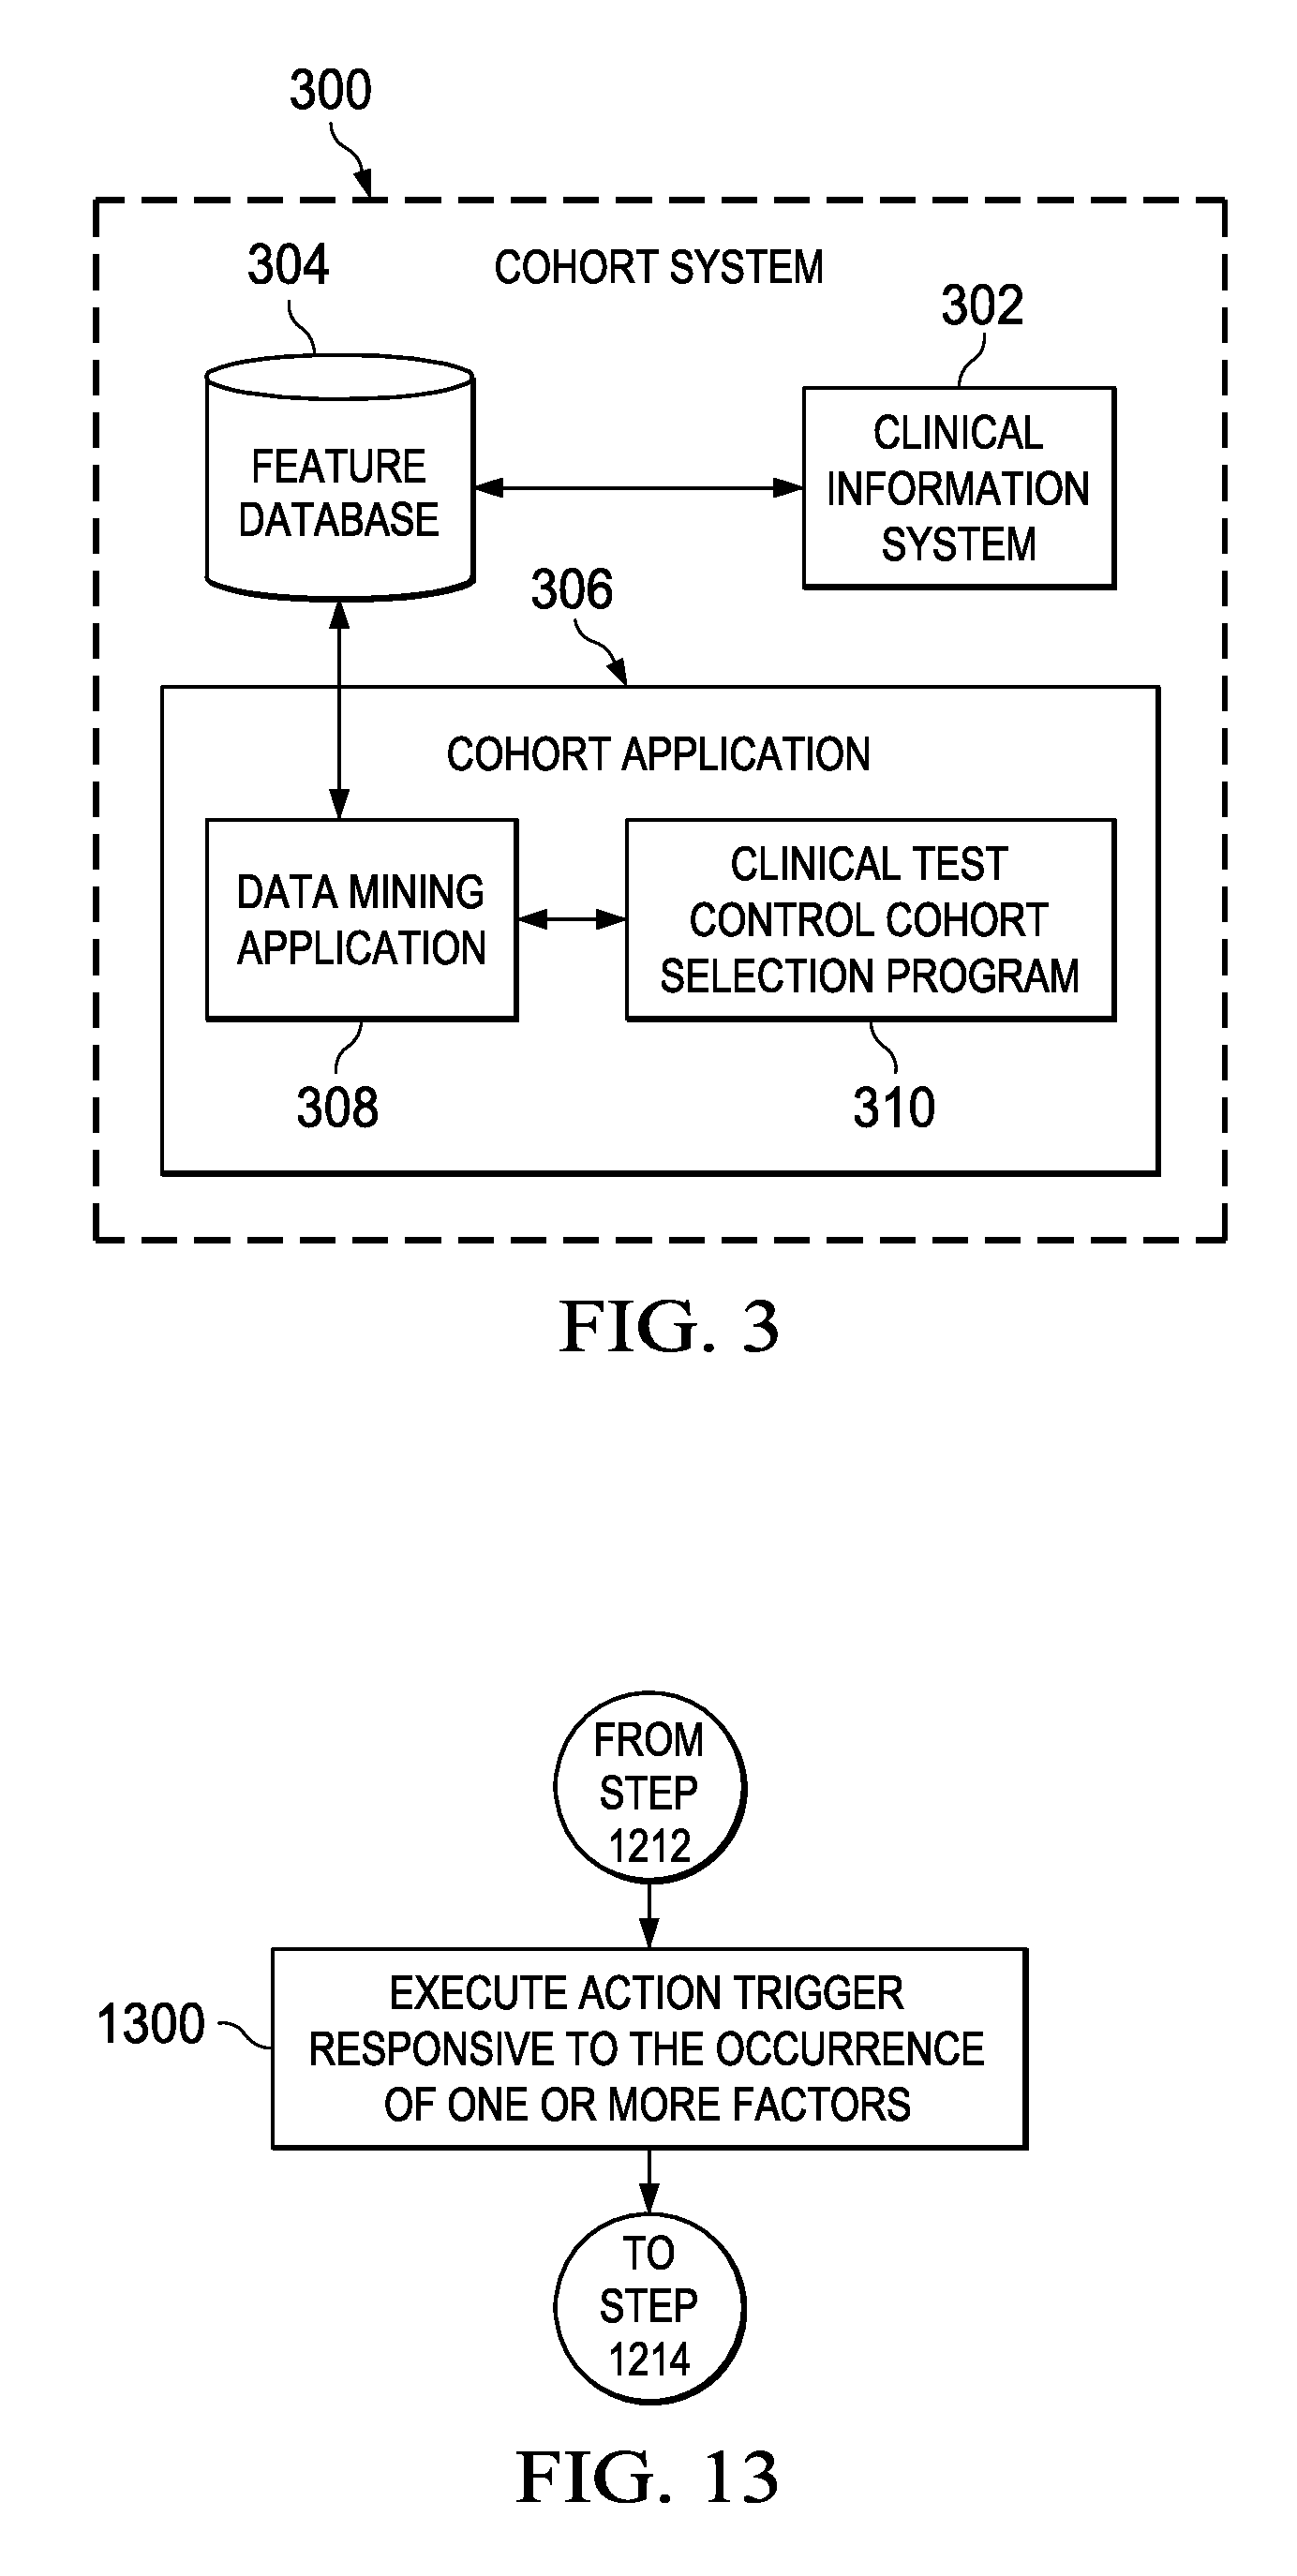 System and method for optimizing medical treatment planning and support in difficult situations subject to multiple constraints and uncertainties